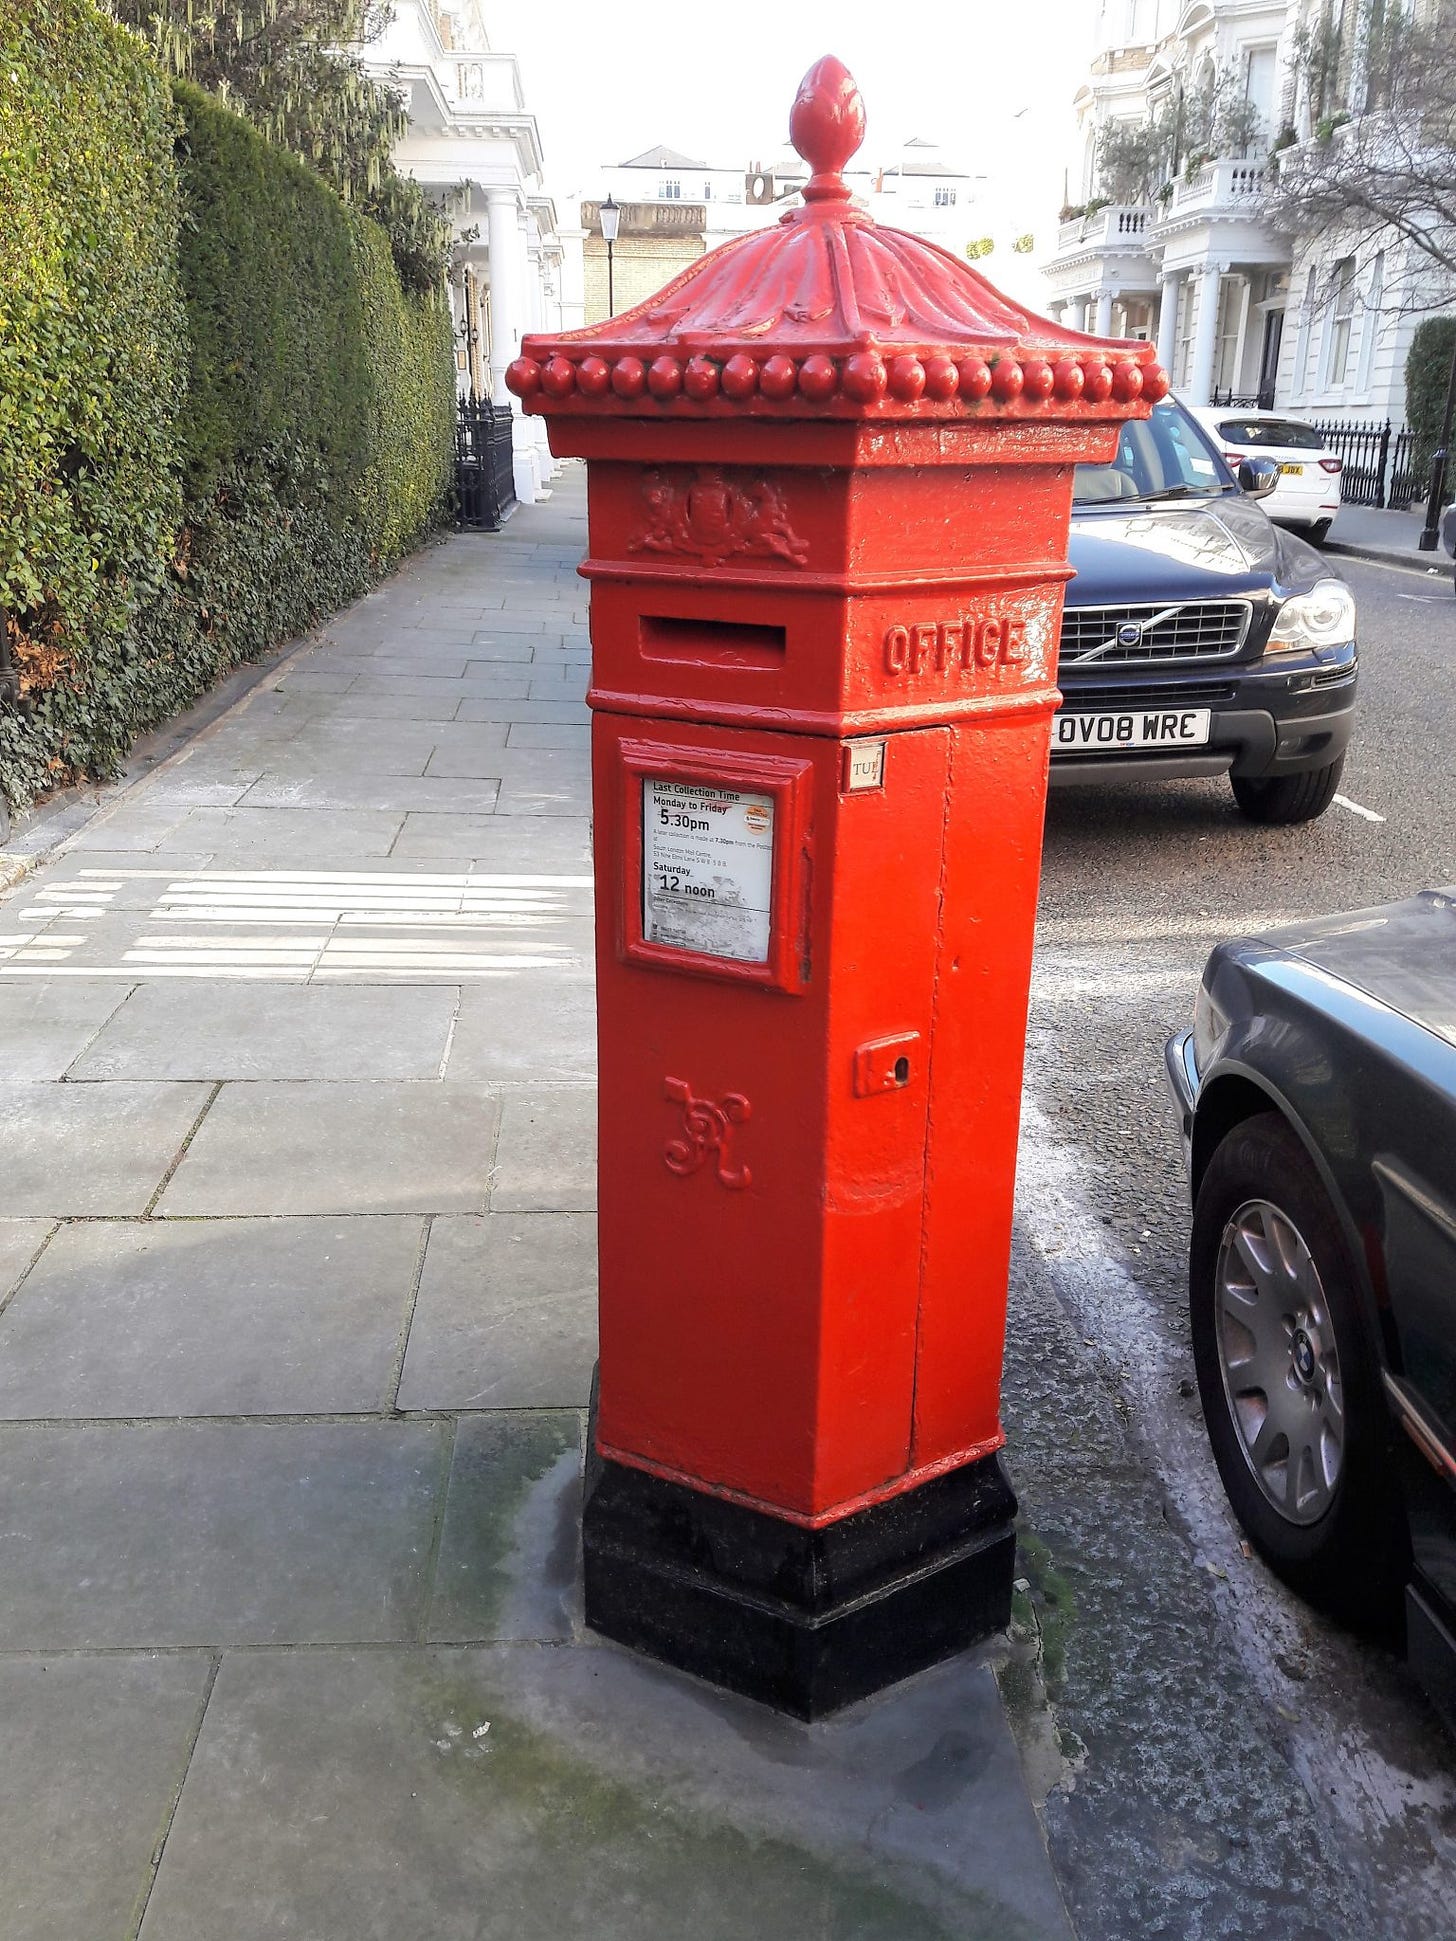 London's historically significant - Pillar/Post Boxes - London Shoes